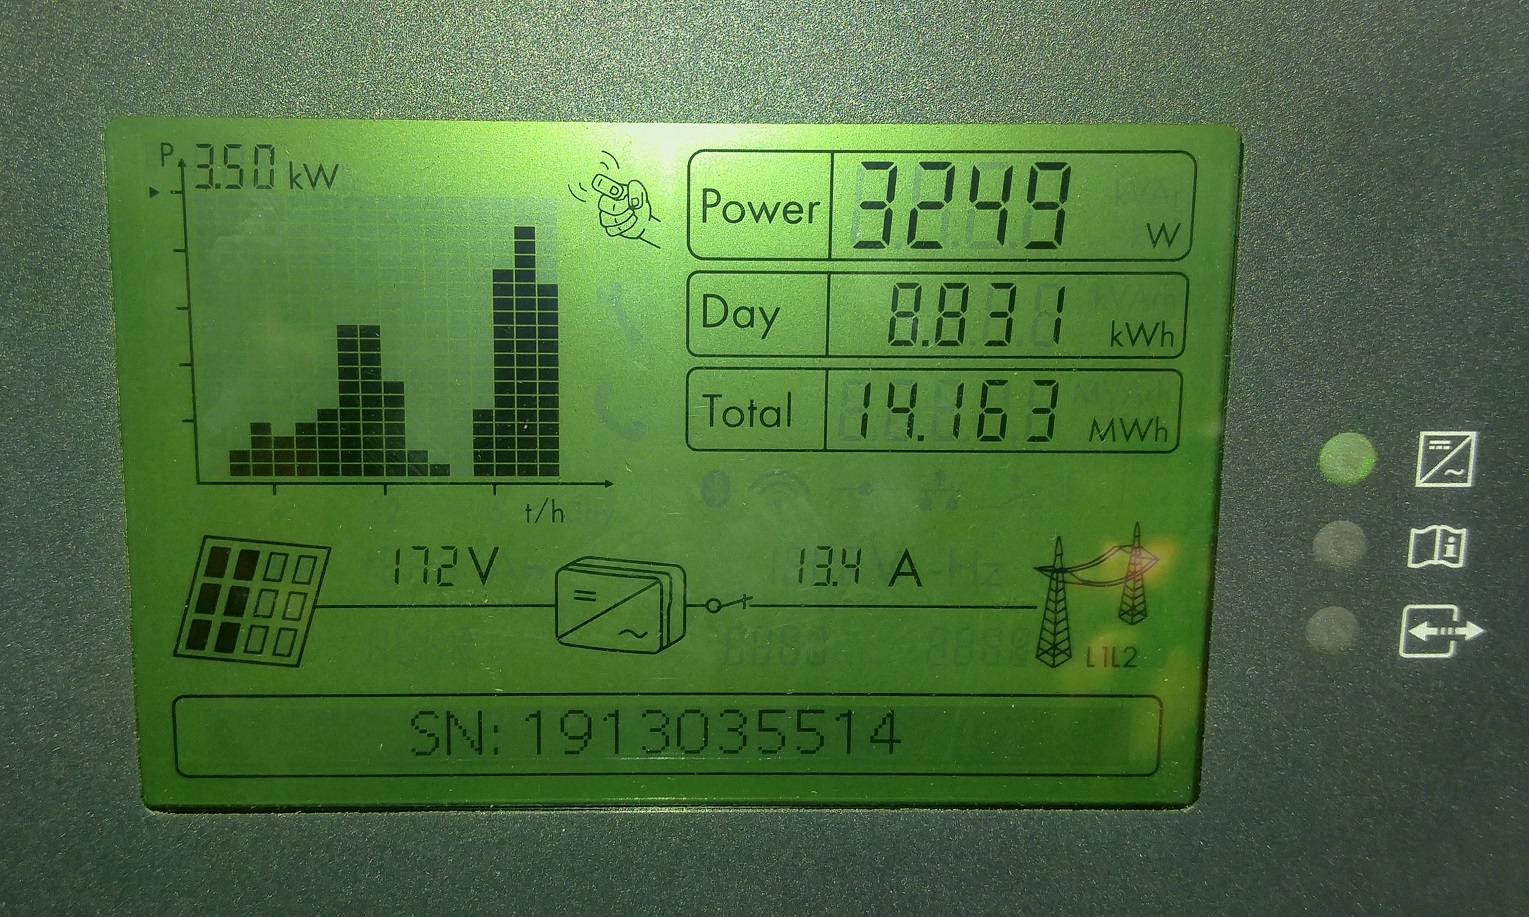 Solar Power Cost - Central Inverter Display